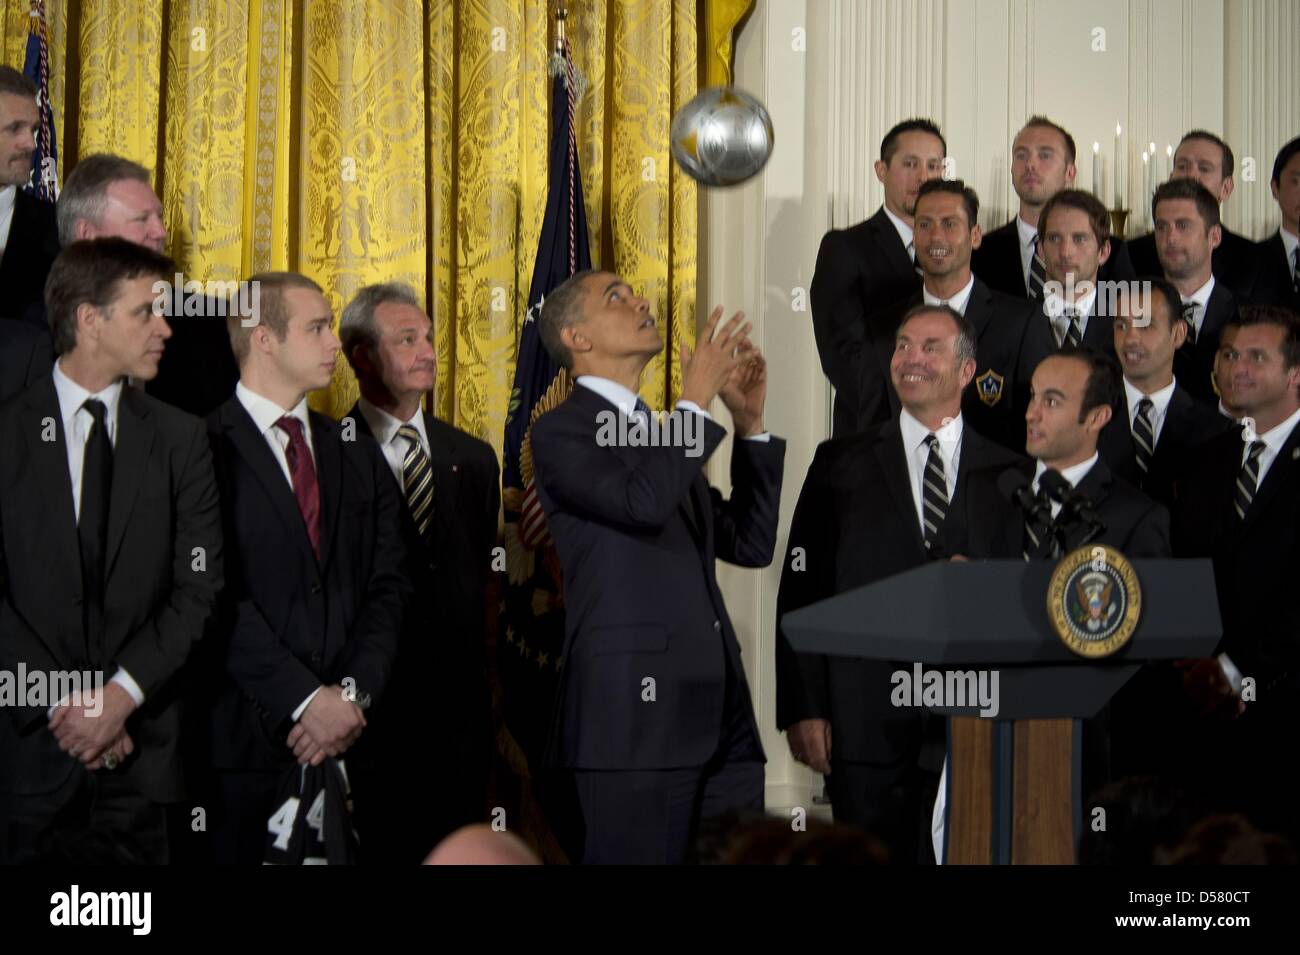 Washington, DC, USA. 26th March, 2013. The White House-Washington DC..President Barack Obama welcomes the Stanley Cup champion Los Angeles Kings and the Major League Soccer champion LA Galaxy to the White House to honor their 2012 championship seasons in a ceremony in the East Room.He accepts a soccer ball and jersey from the LA Galaxy team..photo:   - ImageCatcher News(Credit Image:  Credit:  Christy Bowe/Globe Photos/ZUMAPRESS.com/Alamy Live News) Stock Photo